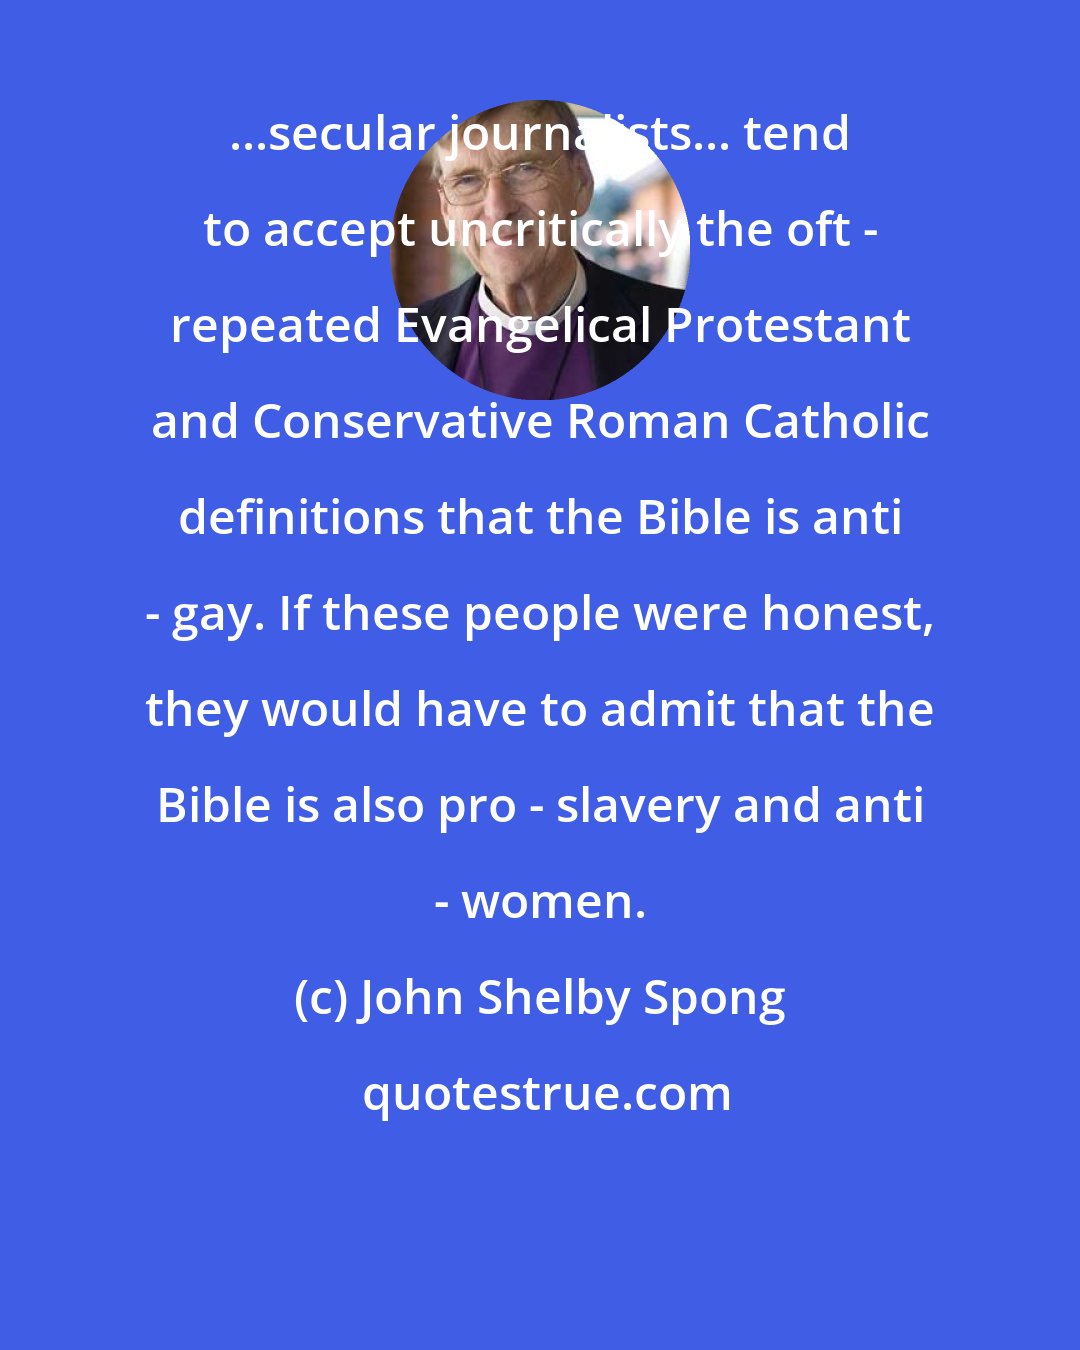 John Shelby Spong: ...secular journalists... tend to accept uncritically the oft - repeated Evangelical Protestant and Conservative Roman Catholic definitions that the Bible is anti - gay. If these people were honest, they would have to admit that the Bible is also pro - slavery and anti - women.